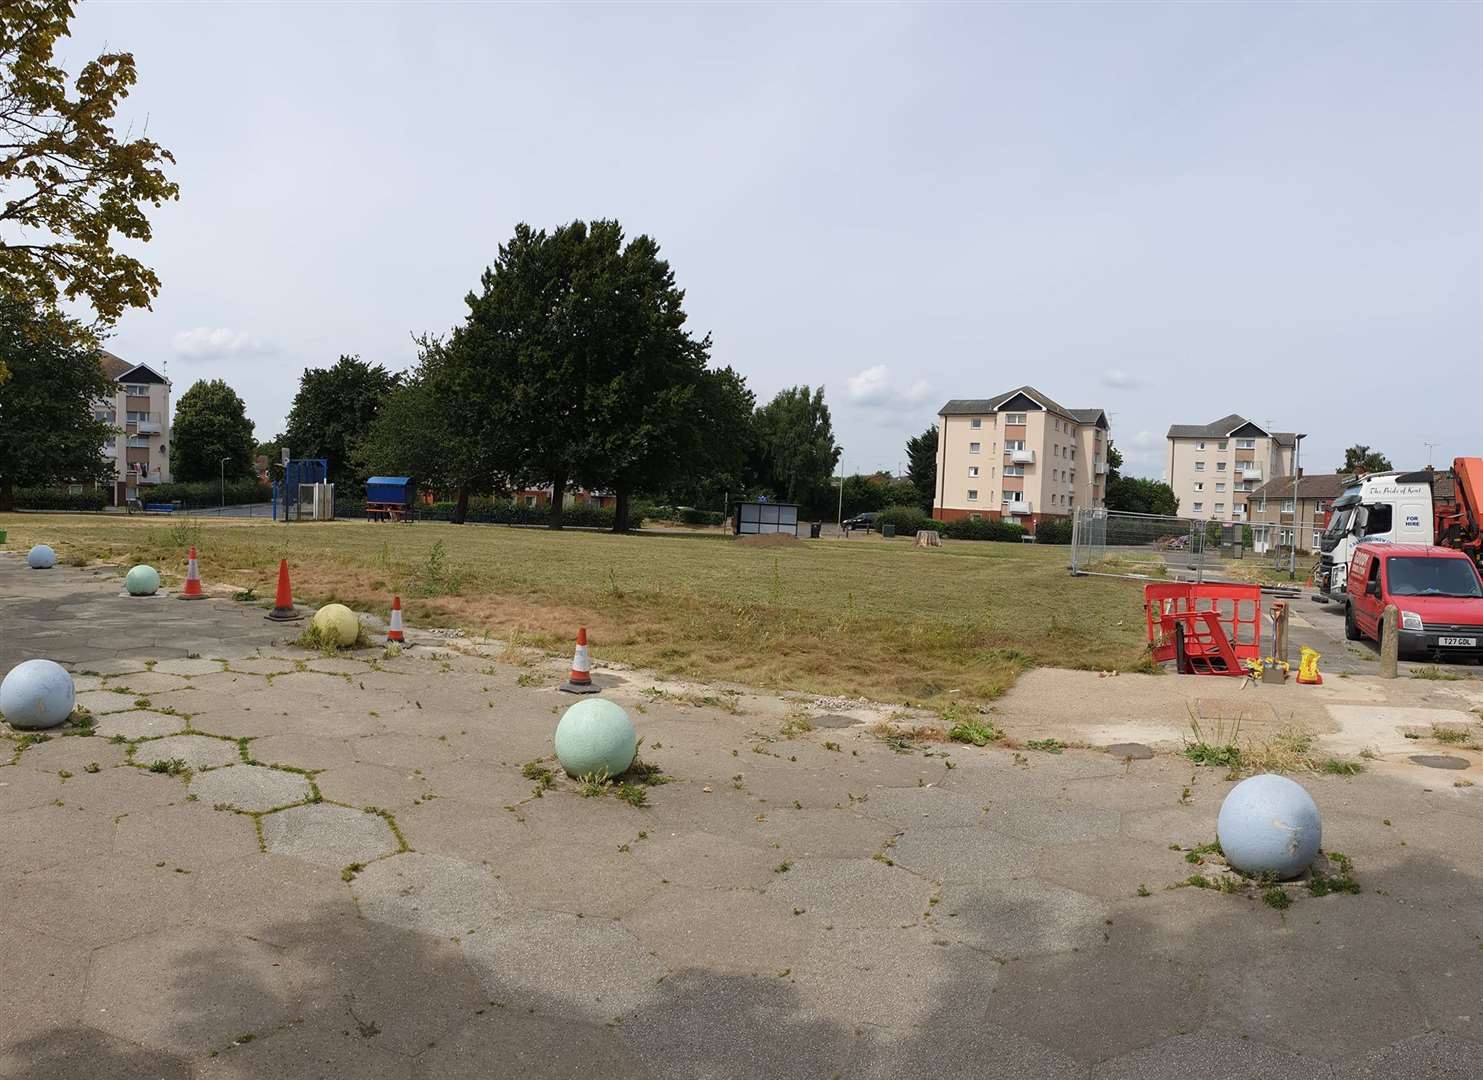 The former site of the Bockhanger Community centre is now being used for a football pitch despite the lockdown